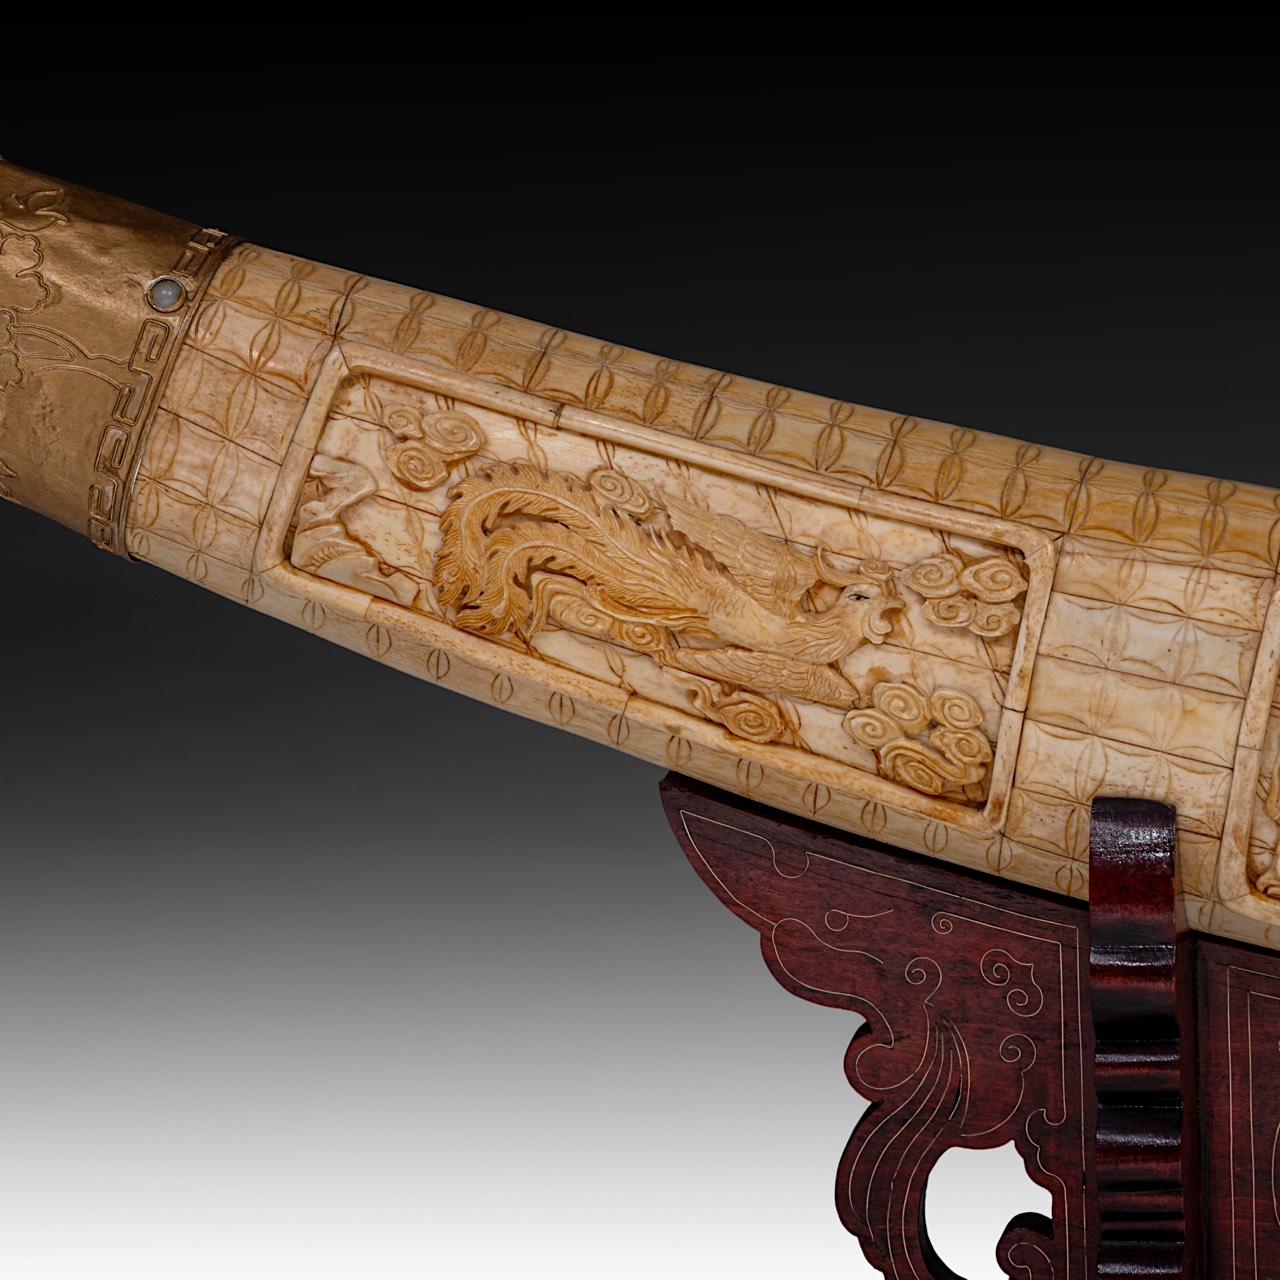 Tusk made from sculpted bone slats, Qing/Republic period, inner arch 165 cm - outer arch 175 cm - Image 13 of 13